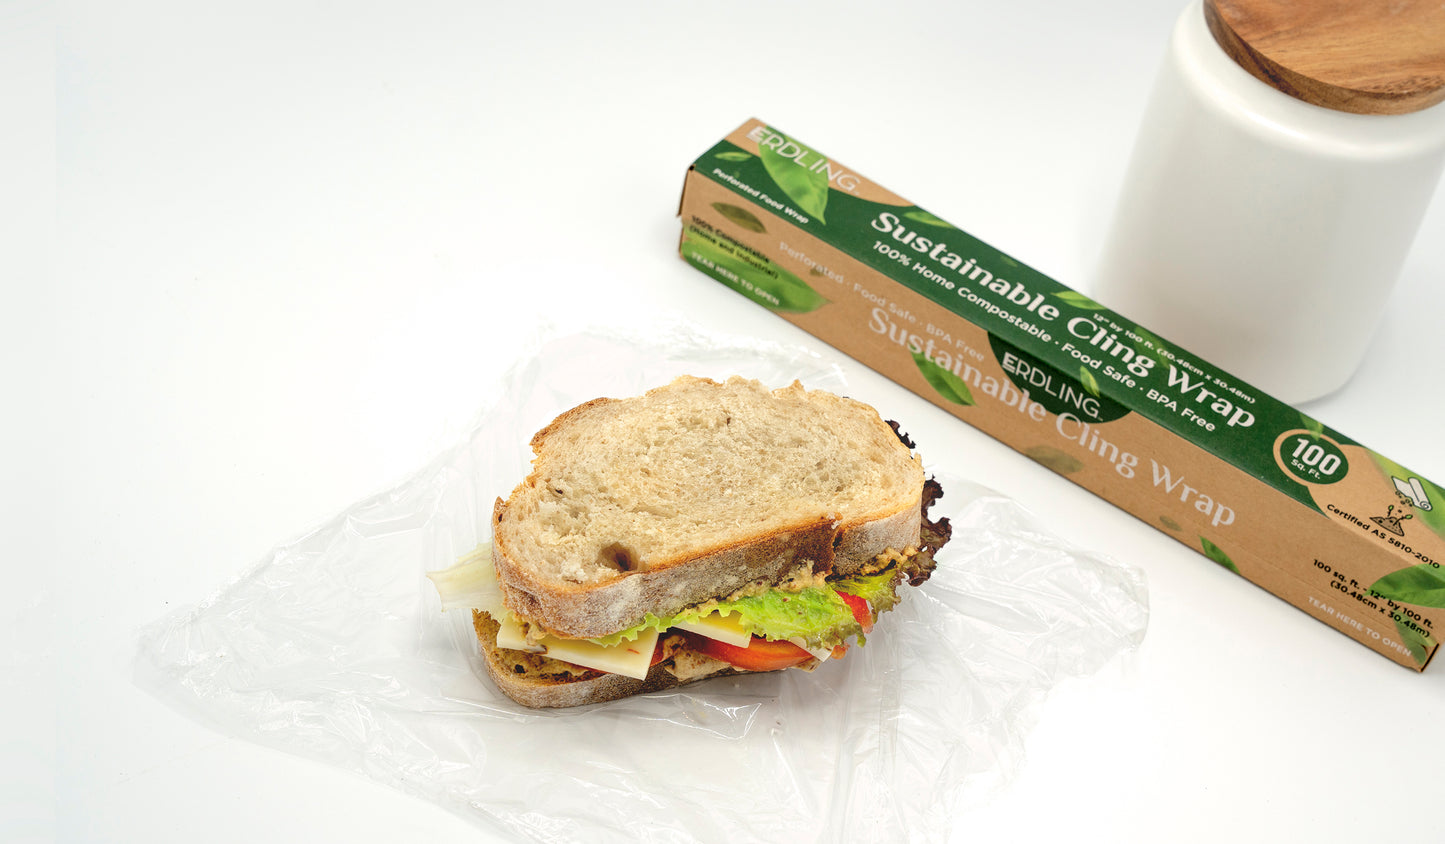 Erdling Sustainable Cling Wrap Compostable BPA Free - 100 Sq Ft